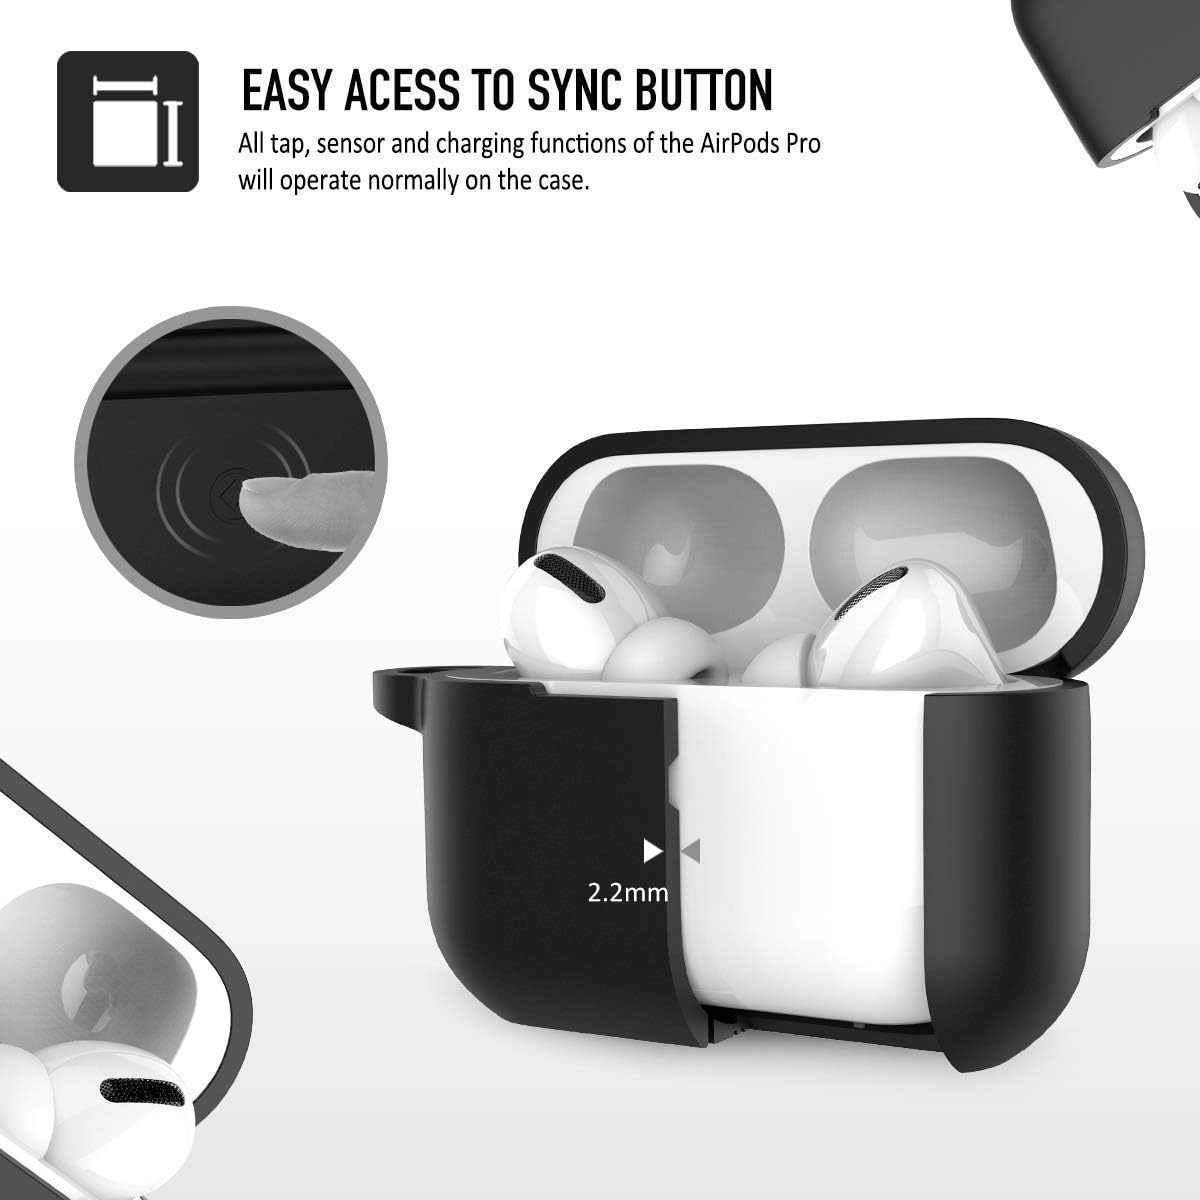 Soft Silicone Case with Keychain for AirPods Pro (Black)